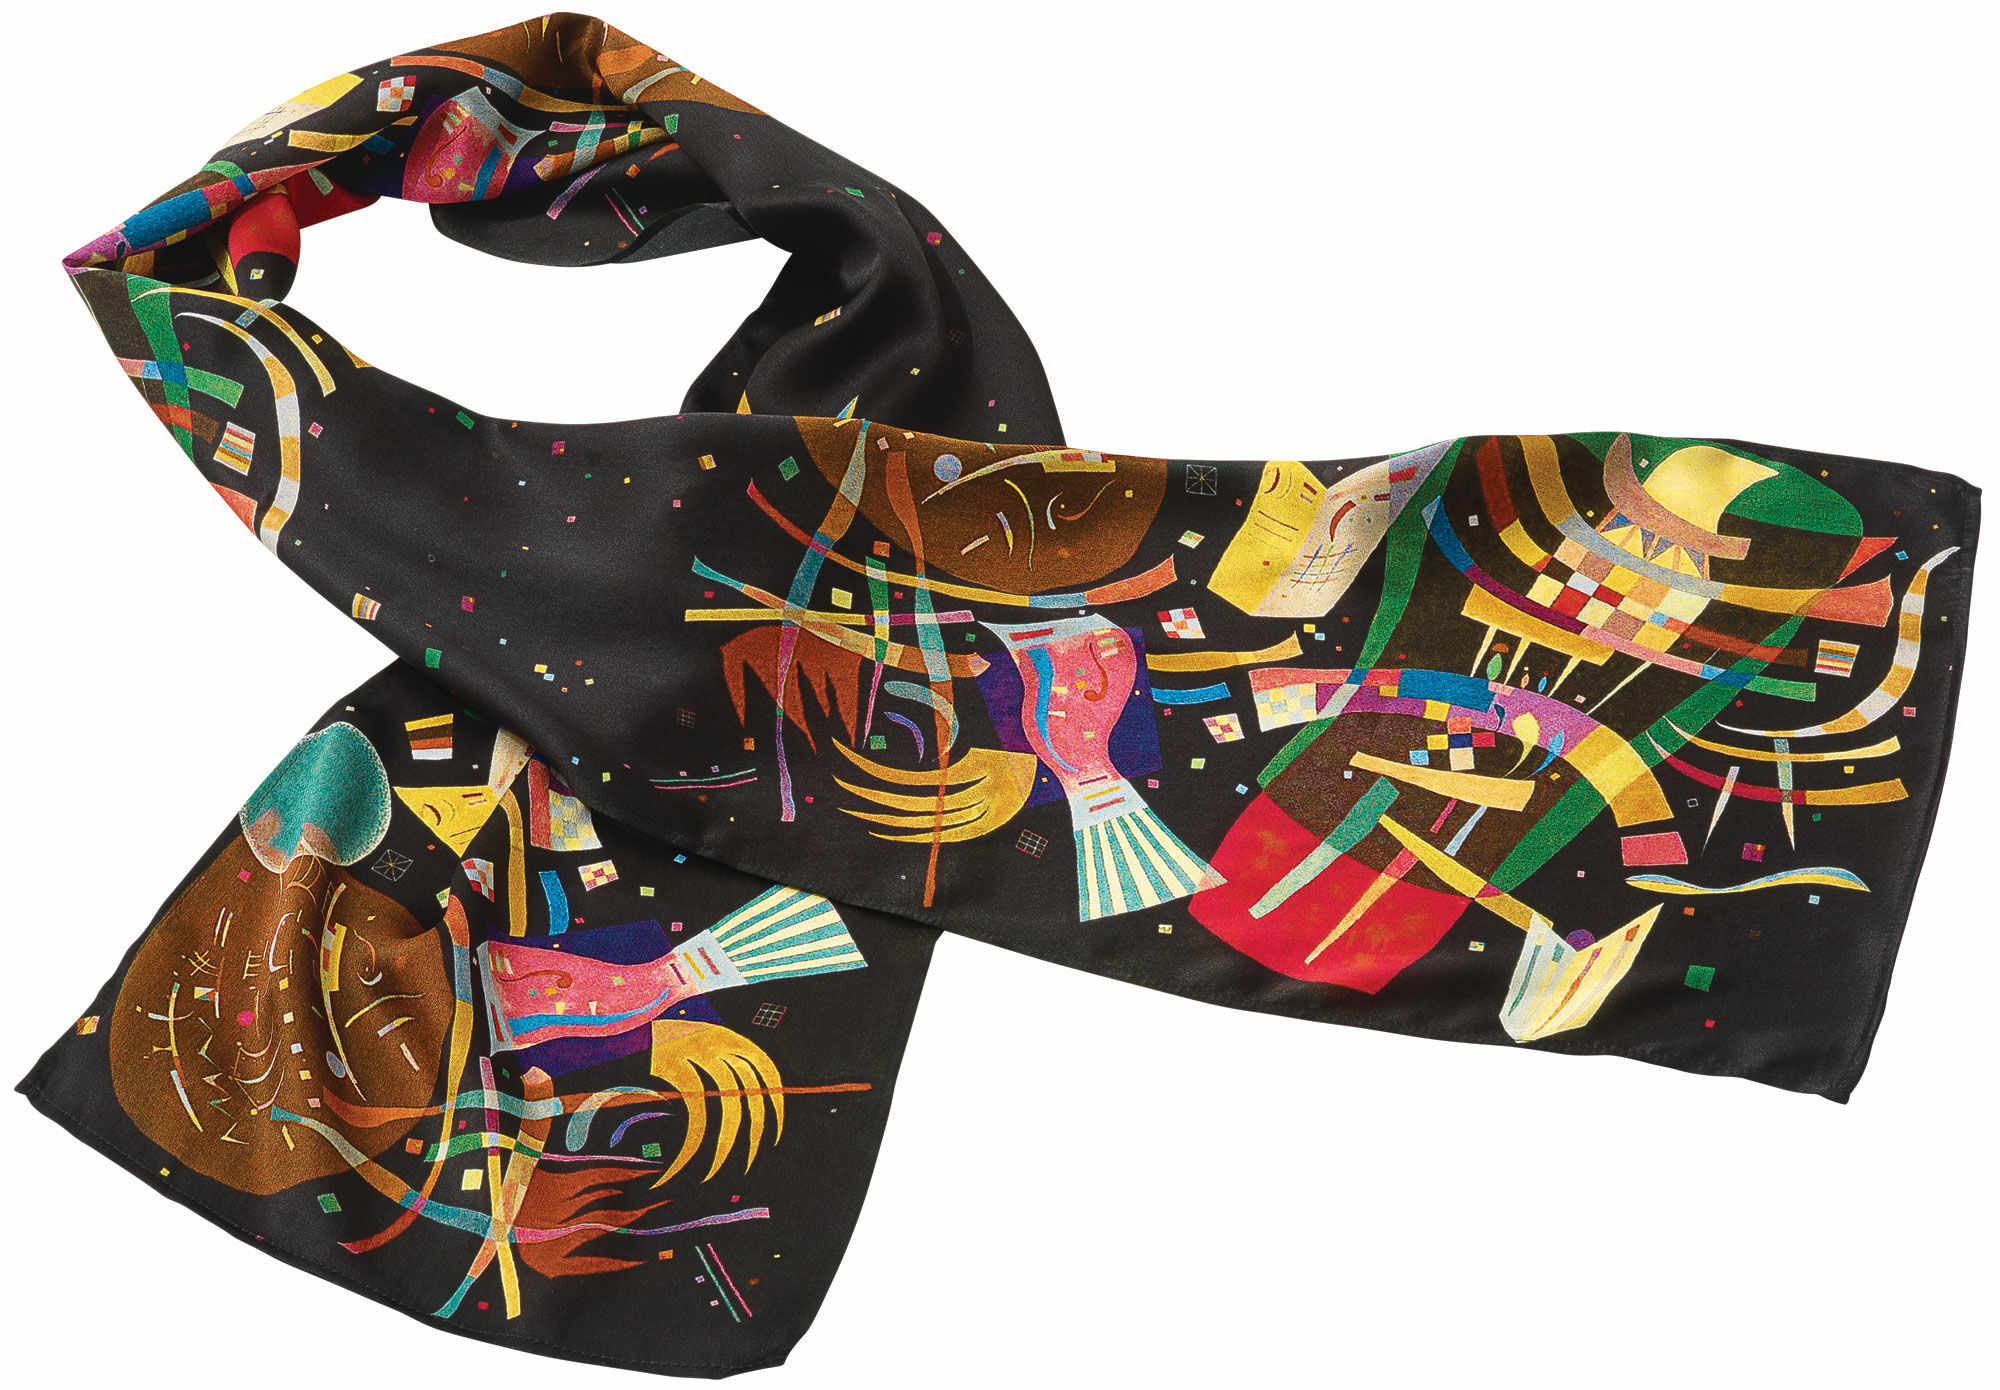 Silk scarf "Composition X" by Wassily Kandinsky